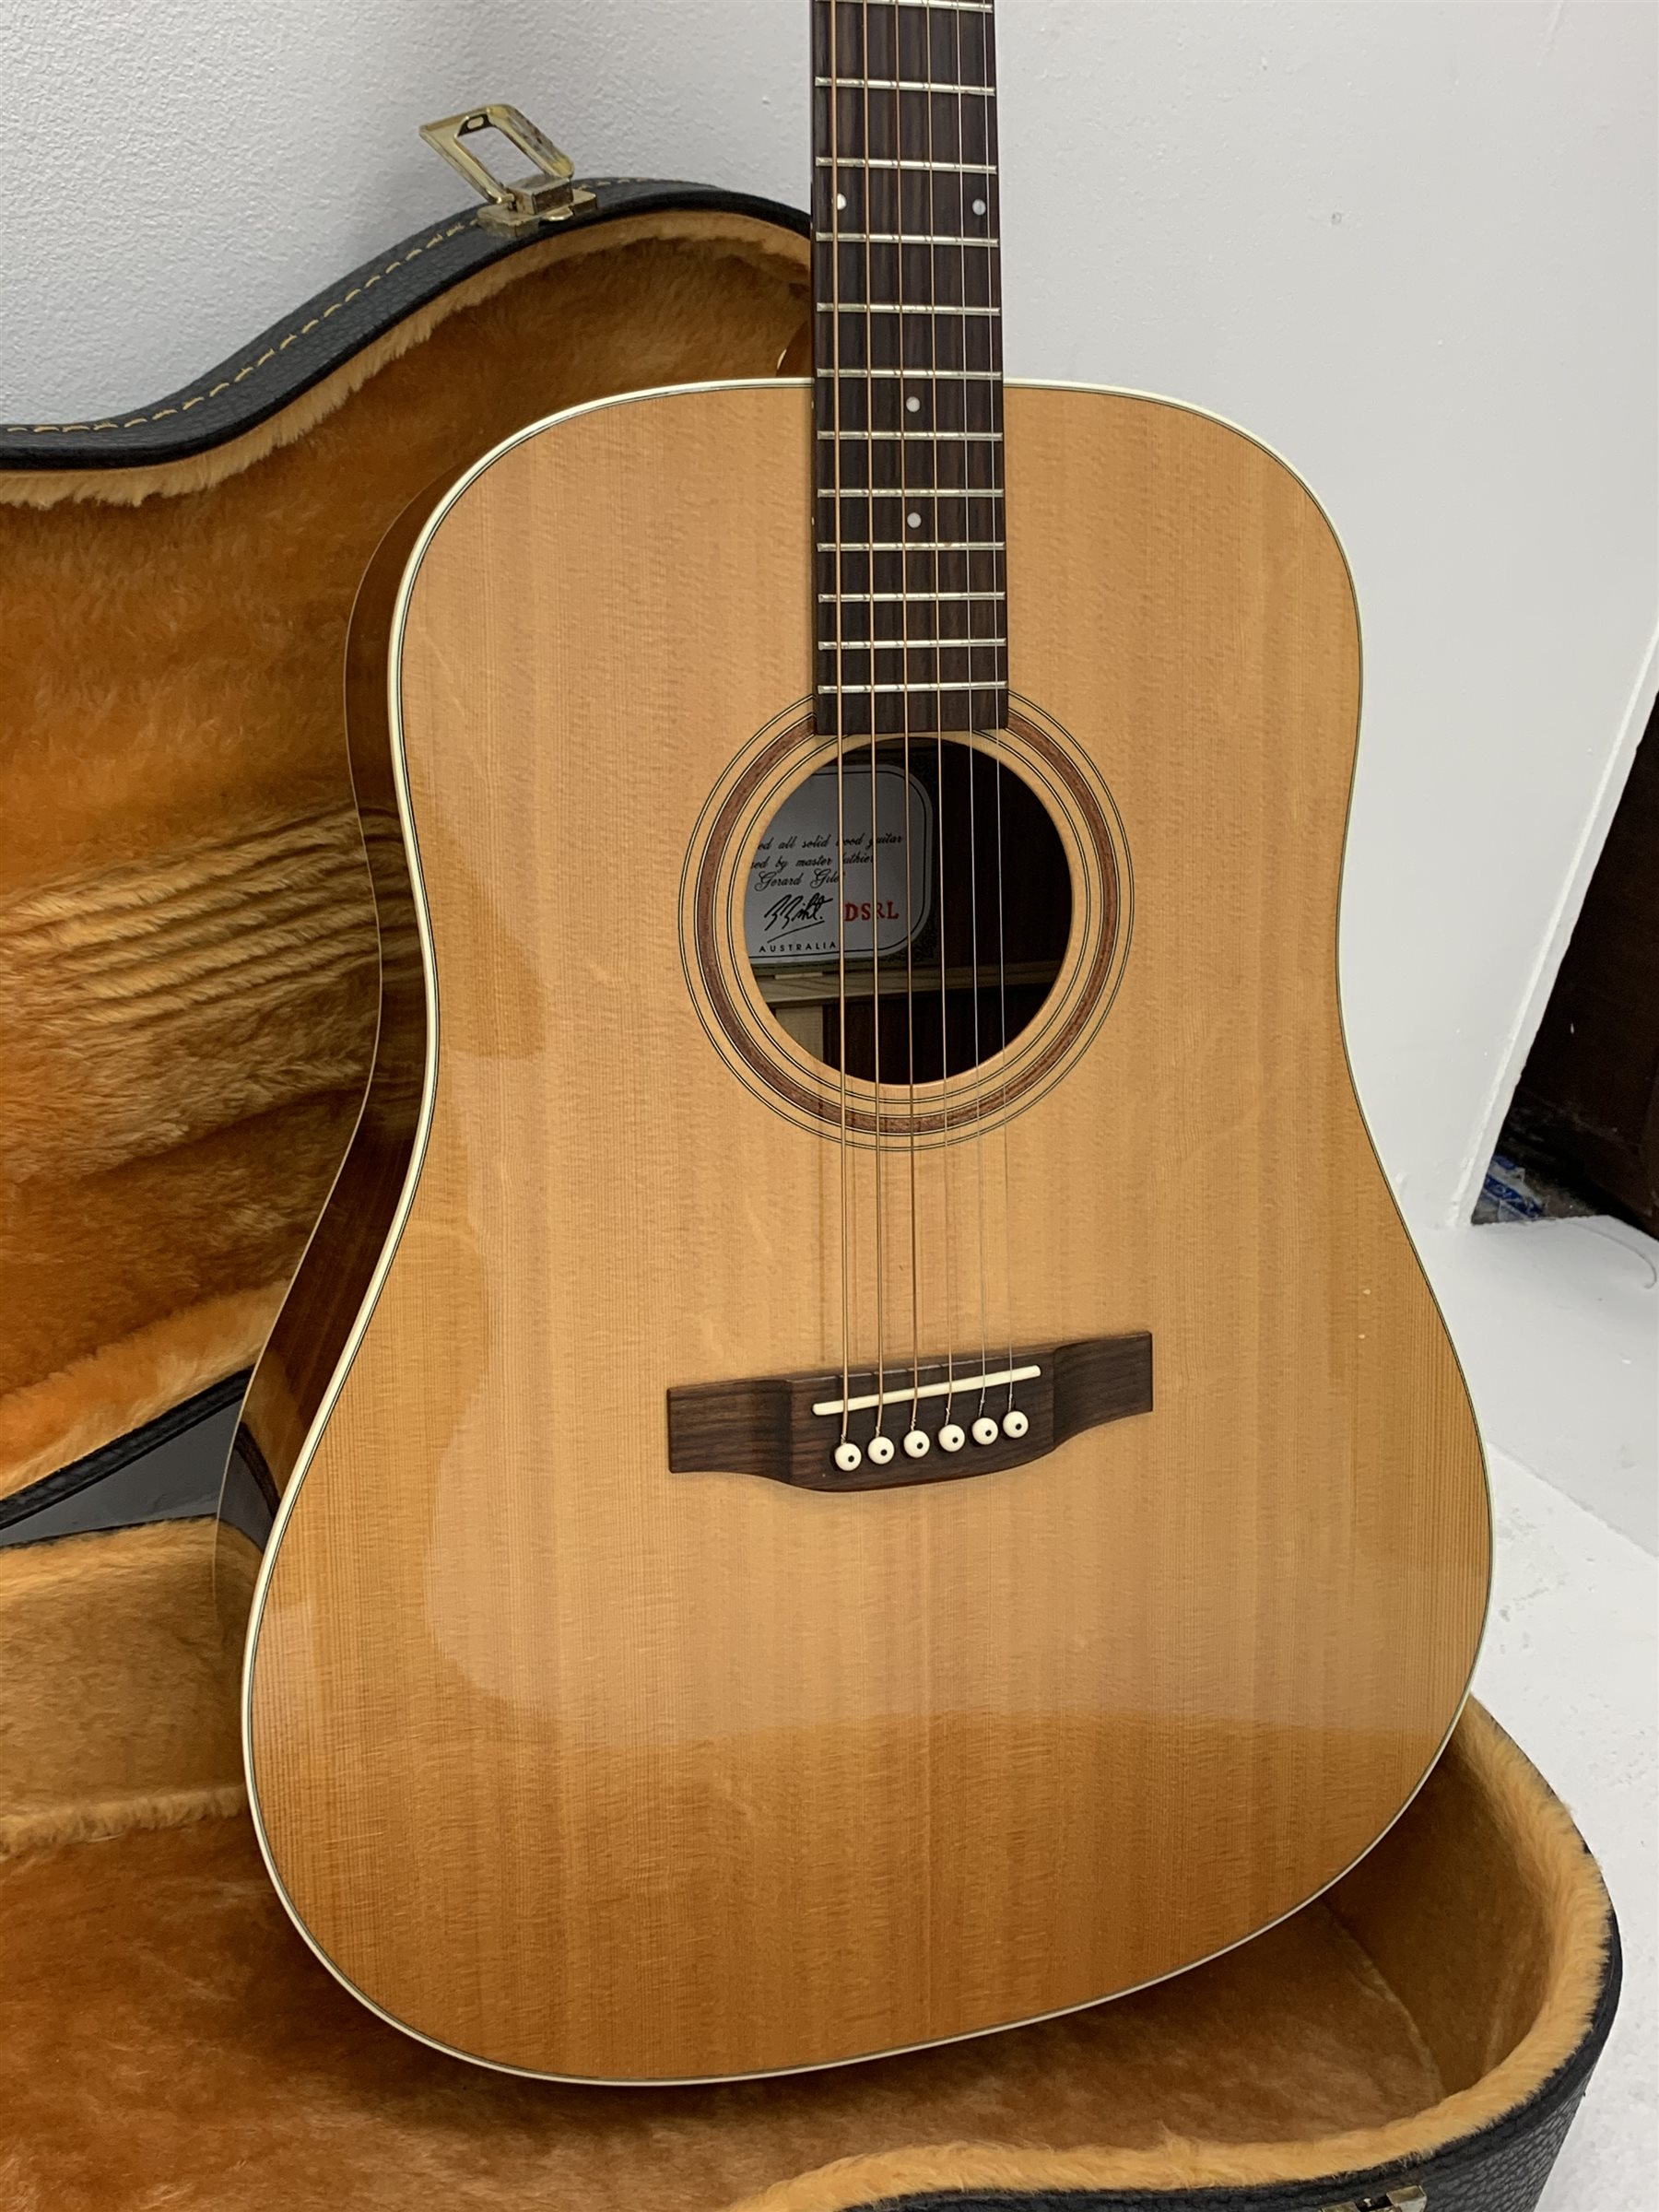 Ayers DSRL acoustic guitar designed by Gerard Gilet, rosewood back and sides and a spruce top rosewo - Image 3 of 7